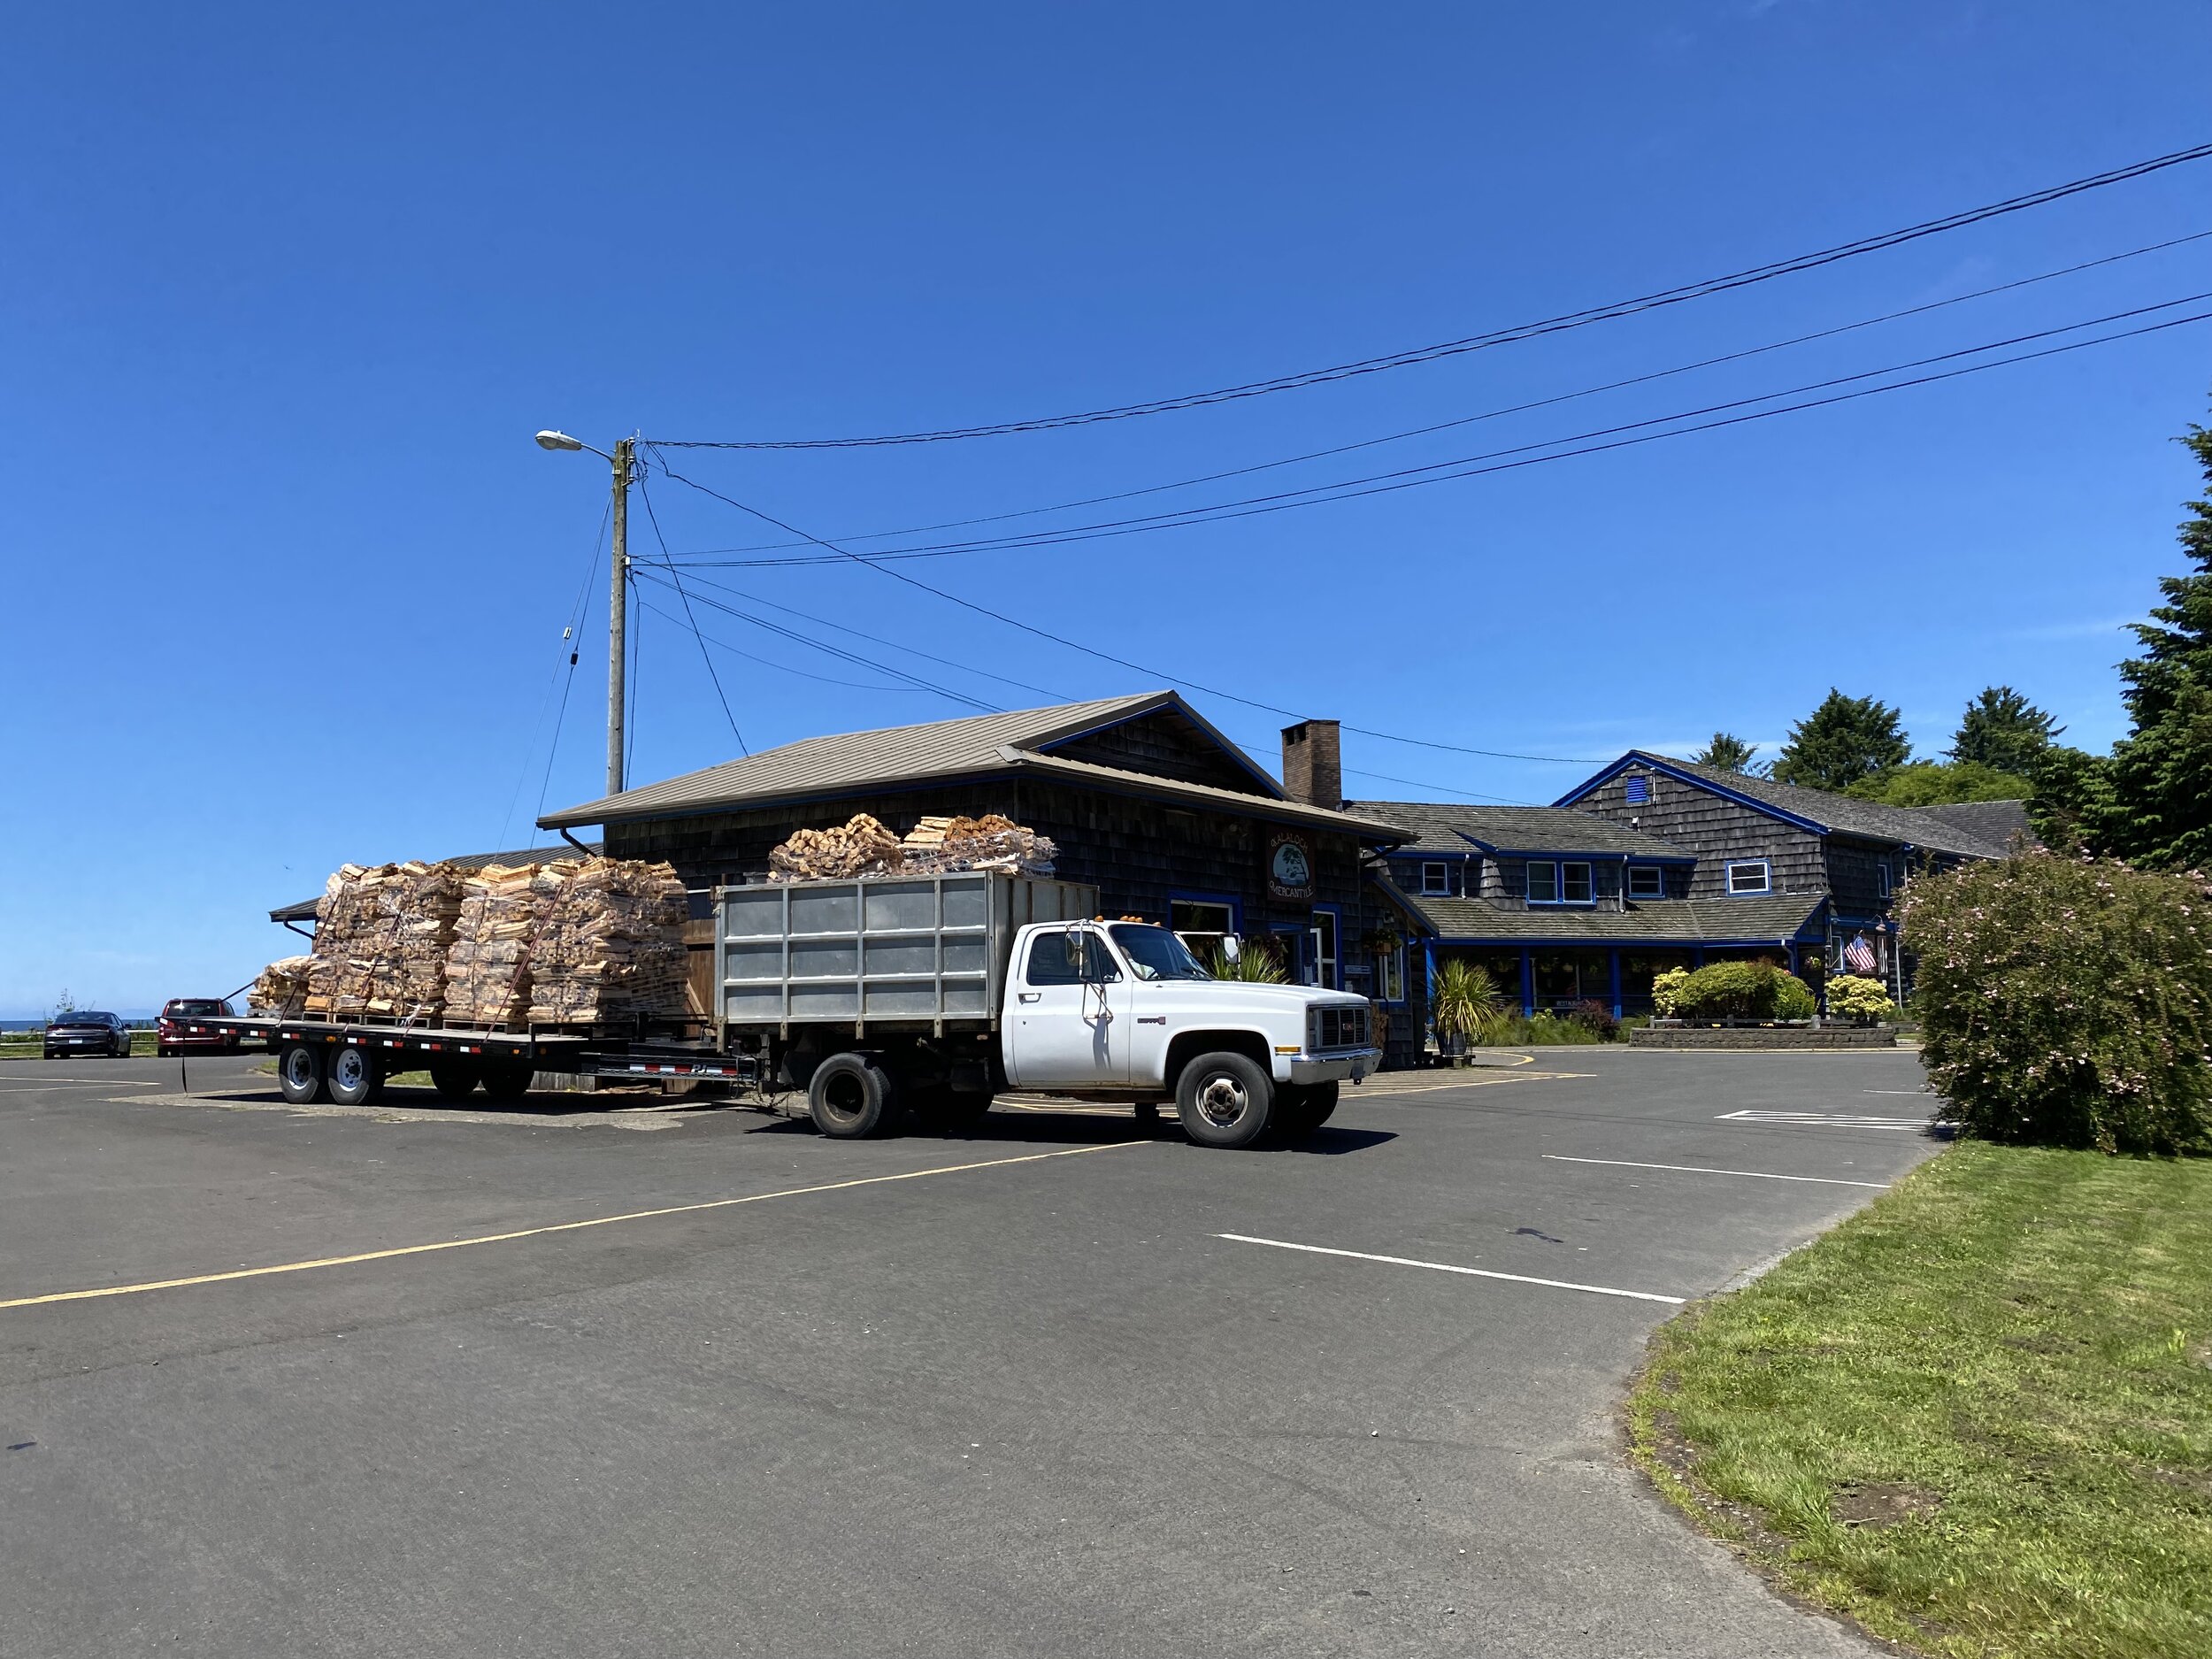 The wood for all the awesome fireplaces being delivered at Kalaloch Lodge